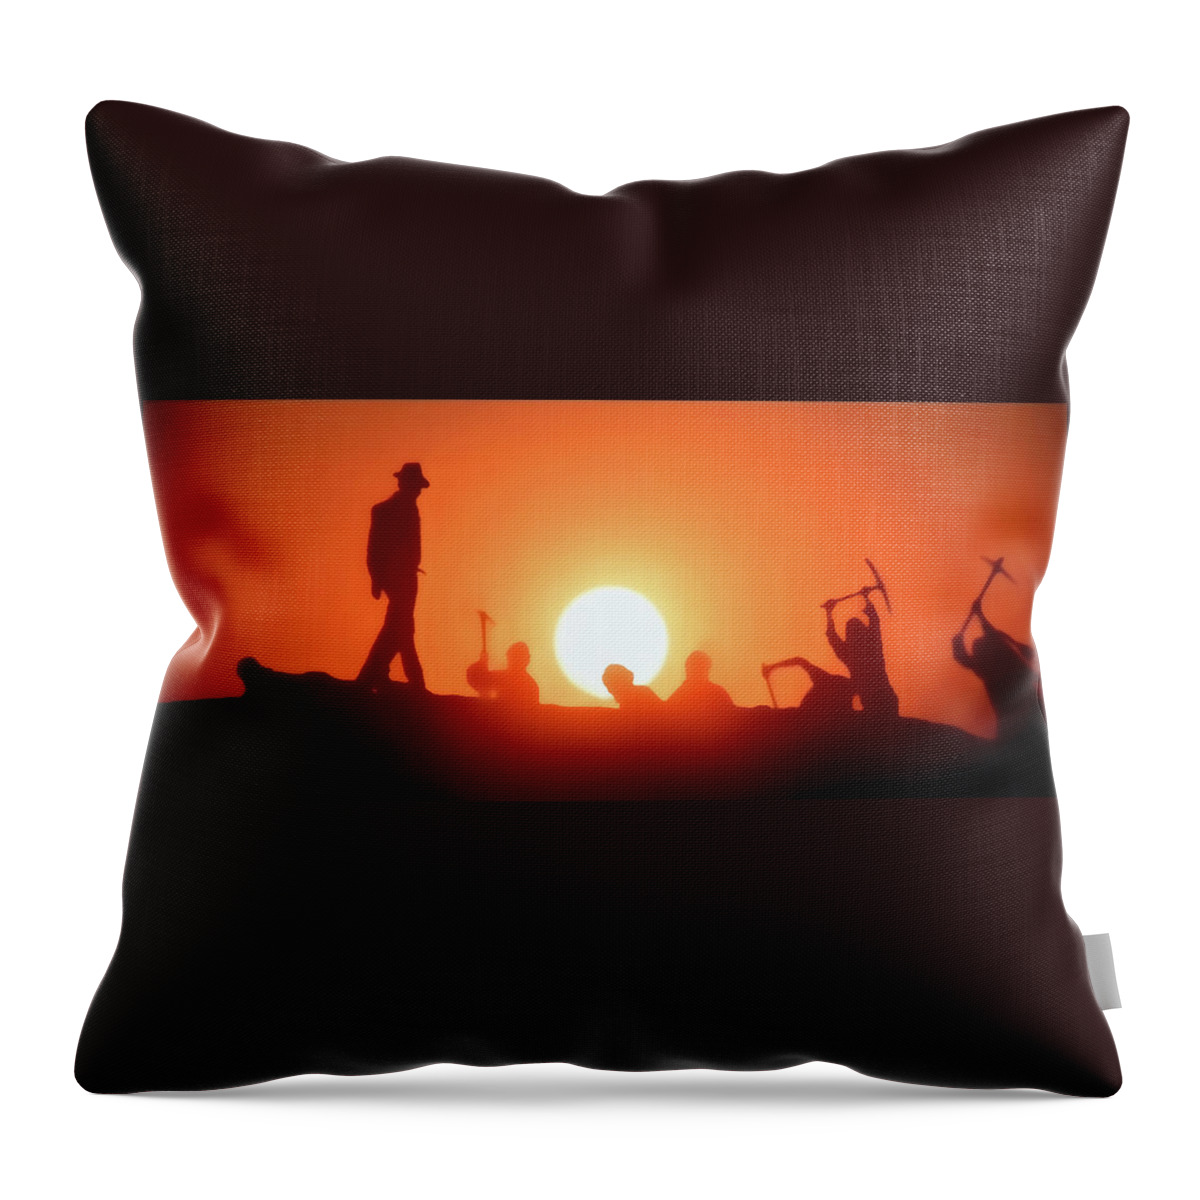 2d Throw Pillow featuring the digital art An Indy Film by Brian Wallace